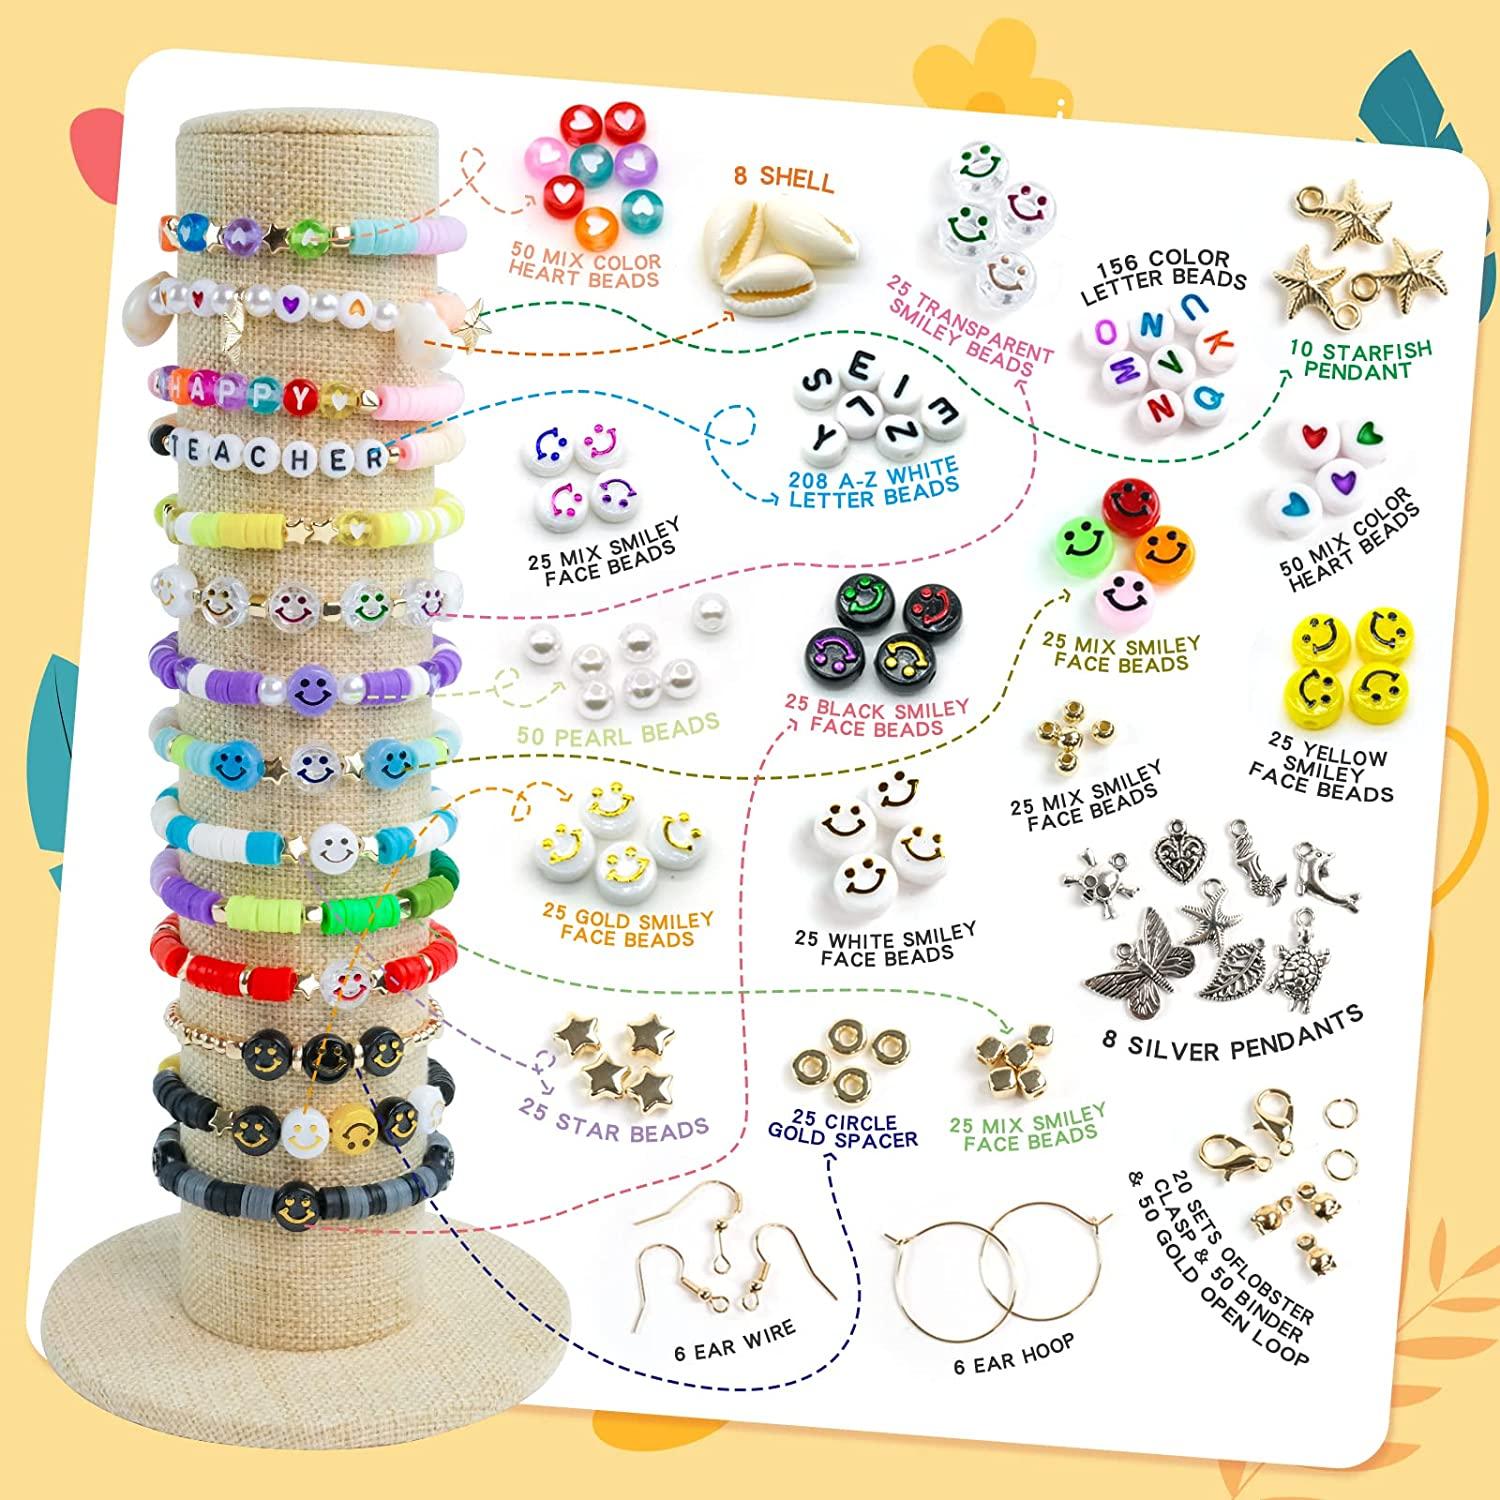 7200 Pcs Clay Beads Bracelet Making Kit, Preppy Friendship Flat Polymer  Beads Jewelry Making Kits With Charms And Elastic Strings, Crafts Gifts Set  Fo